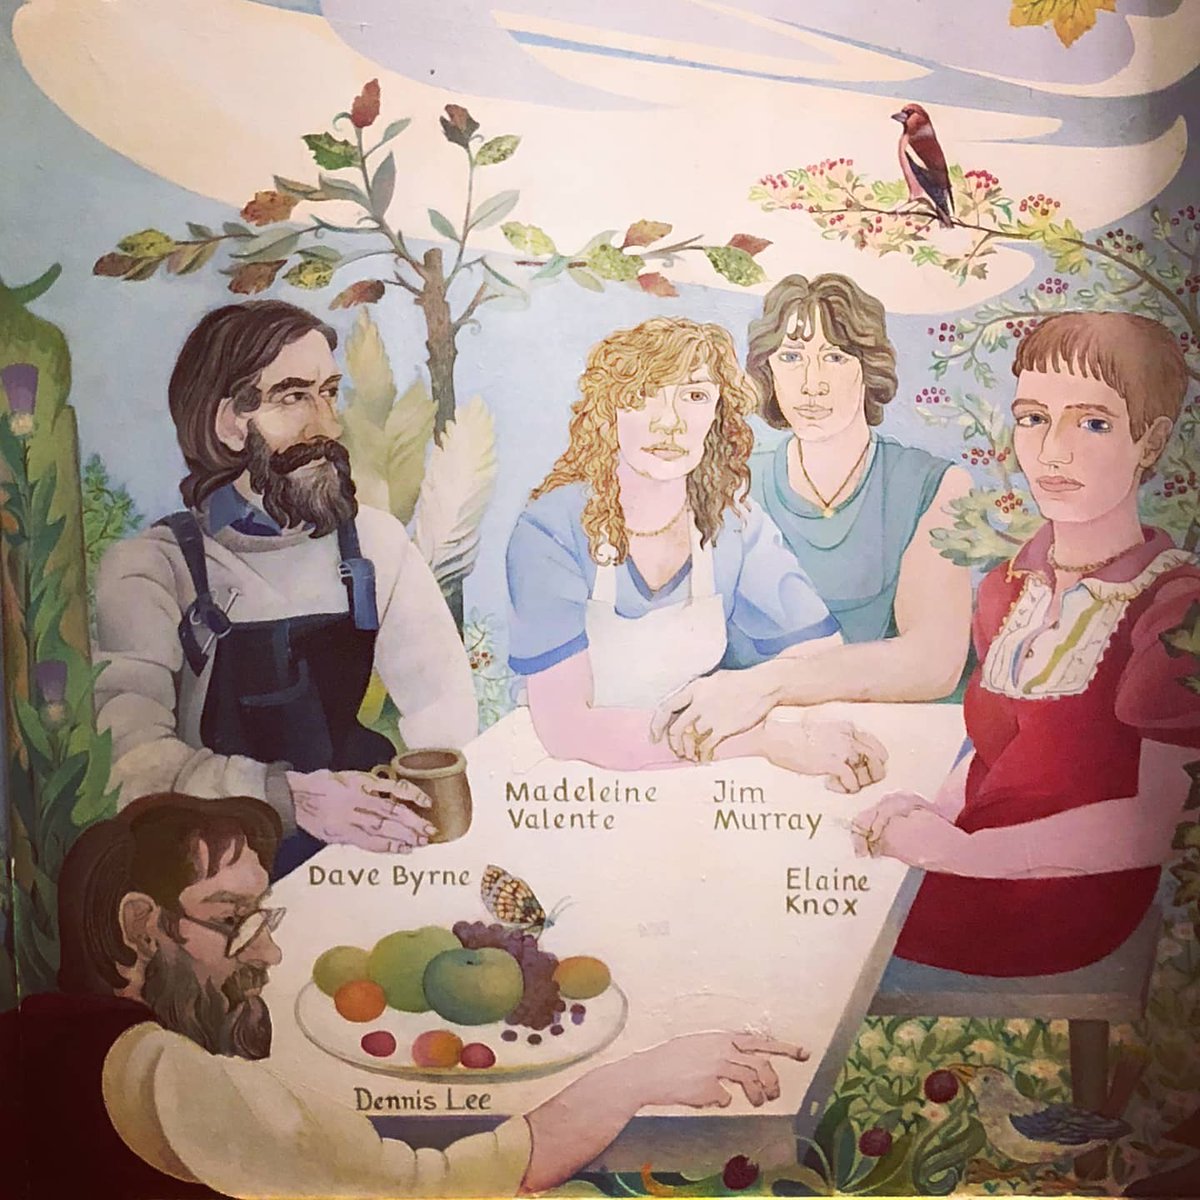 #LockdownBirthday 🎂 2021 marks 50 years of The Chip! Under the stewardship of the Clydesdale family since January 1st 1971 ~ mural by #AlasdairGray 🎨 What are your favourite Chip moments over the last 50 years? #ubiquitouschip #ashtonlane #glasgowrestaurant #50th